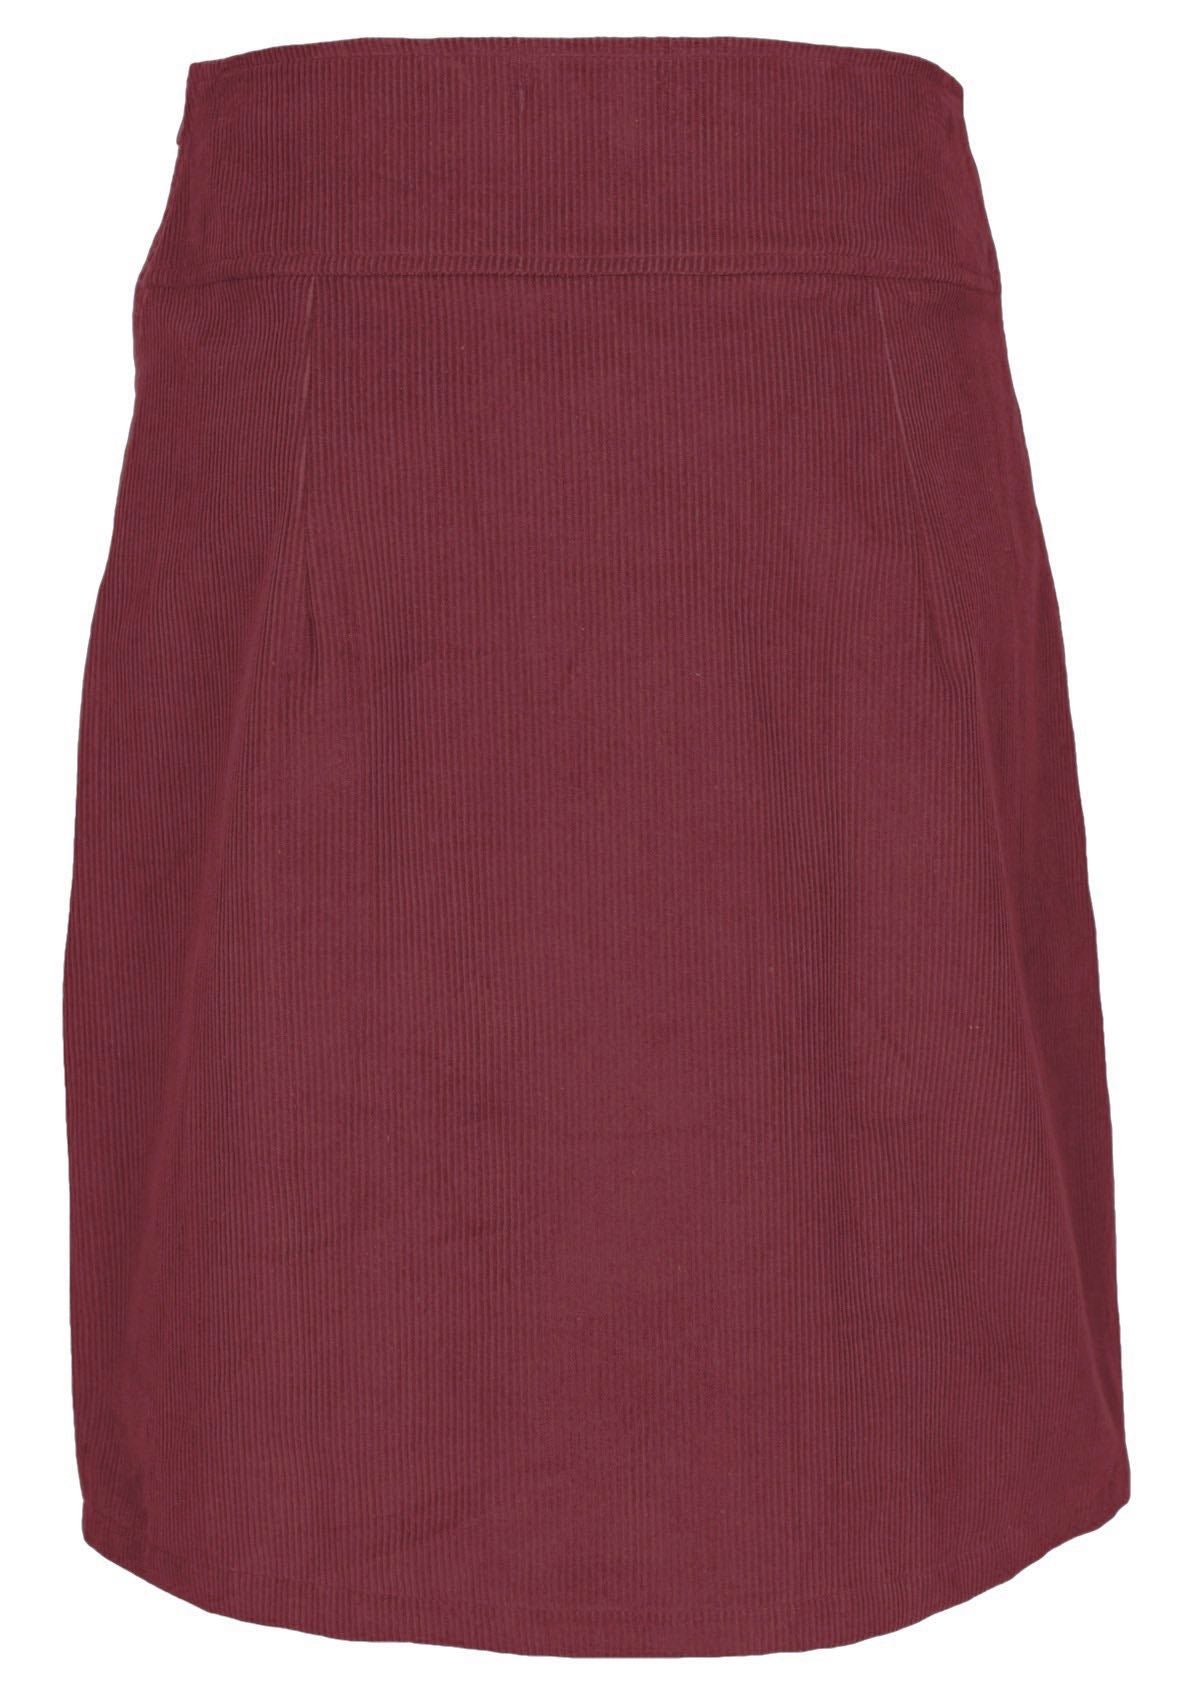 Mid length corduroy skirt is made from 100% cotton corduroy. 